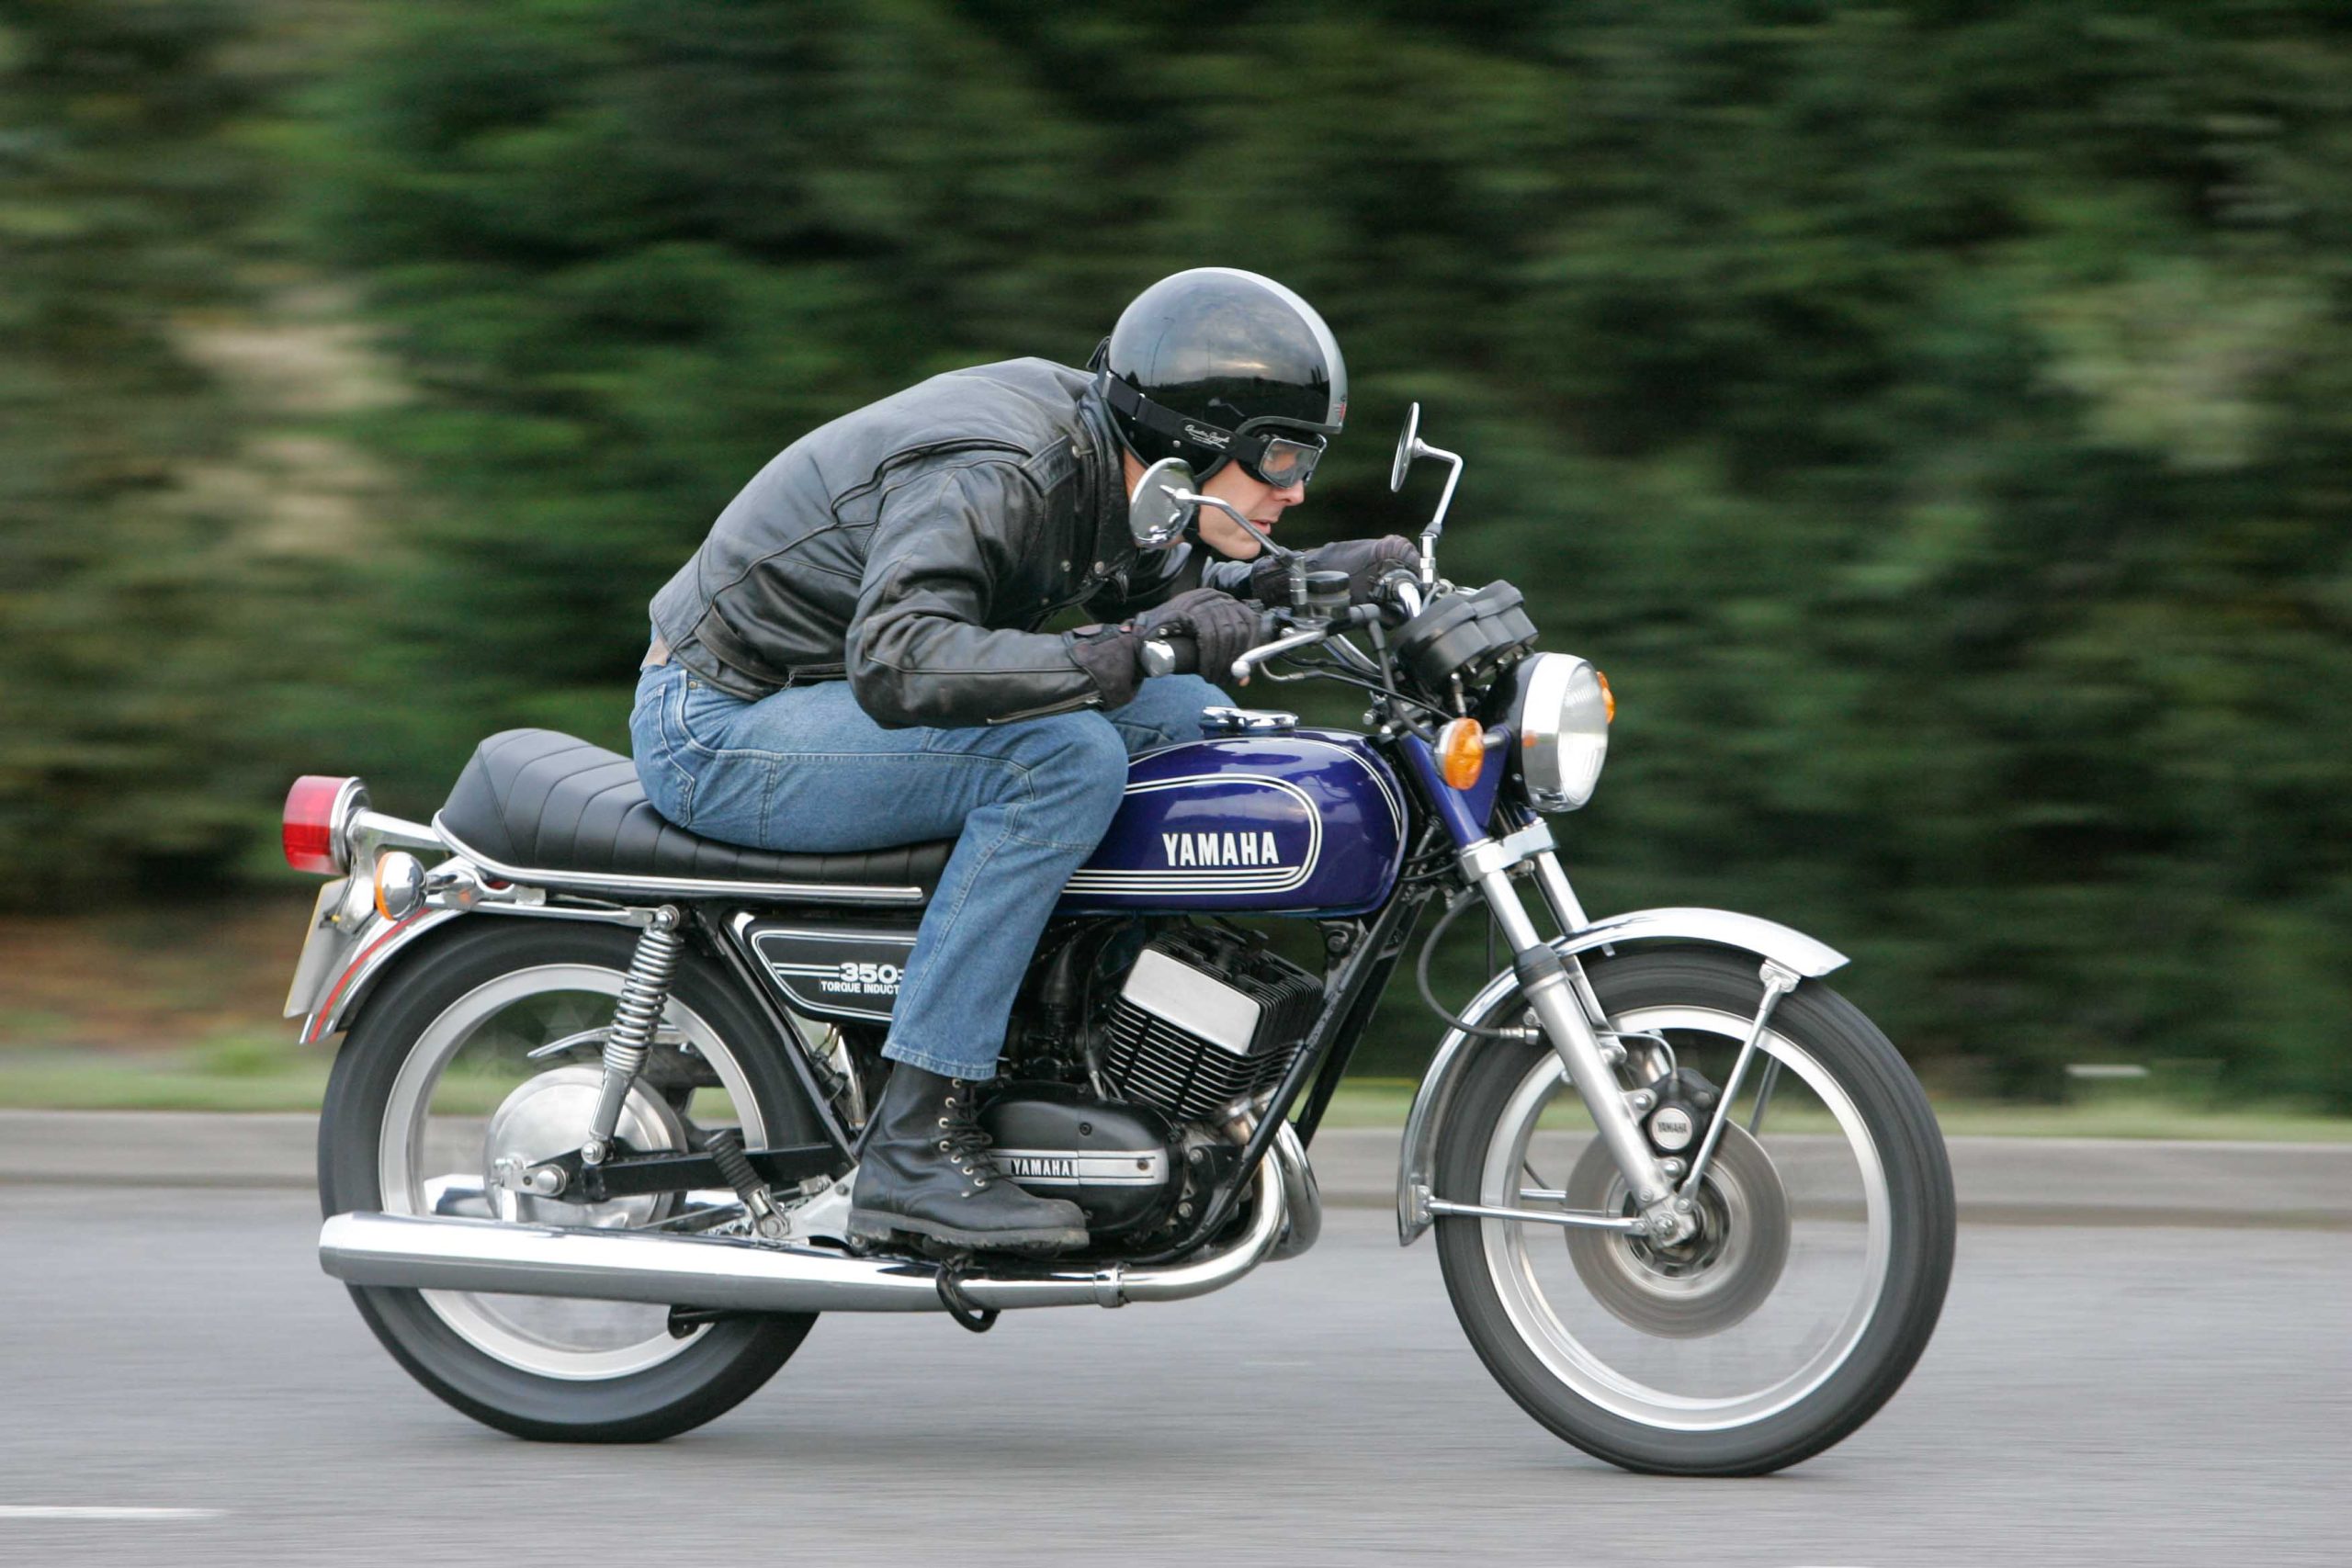 The Yamaha RD350 was the Best Bike of the ’70s